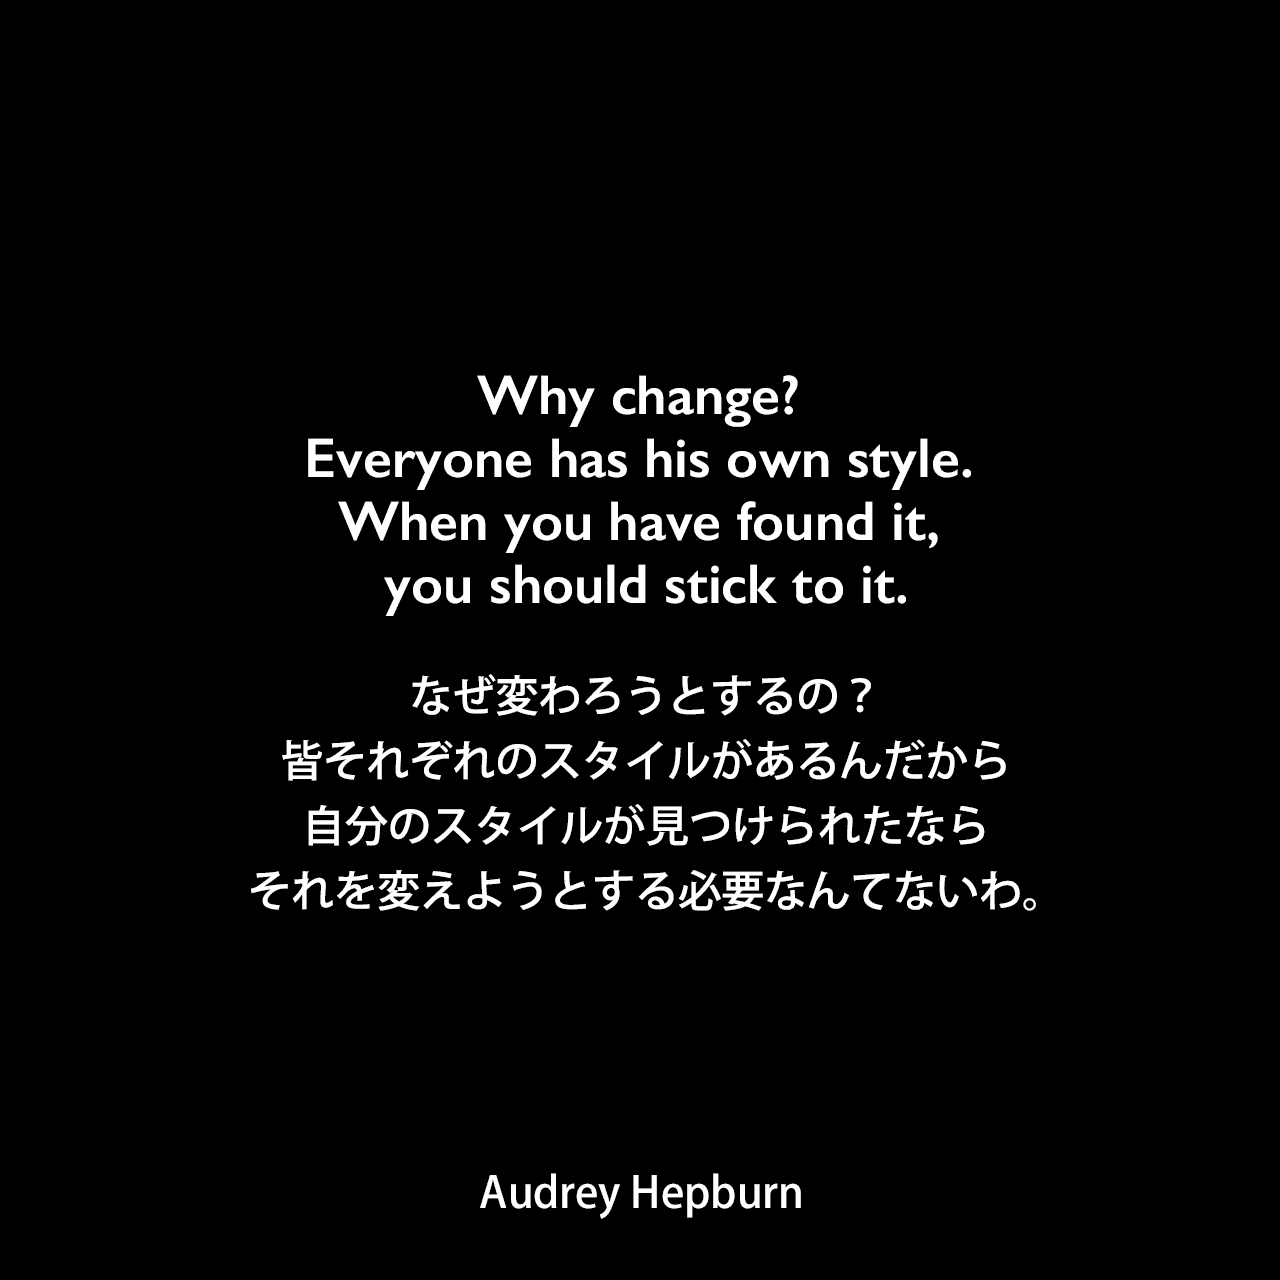 Why change? Everyone has his own style. When you have found it, you should stick to it.なぜ変わろうとするの？皆それぞれのスタイルがあるんだから、自分のスタイルが見つけられたなら、それを変えようとする必要なんてないわ。